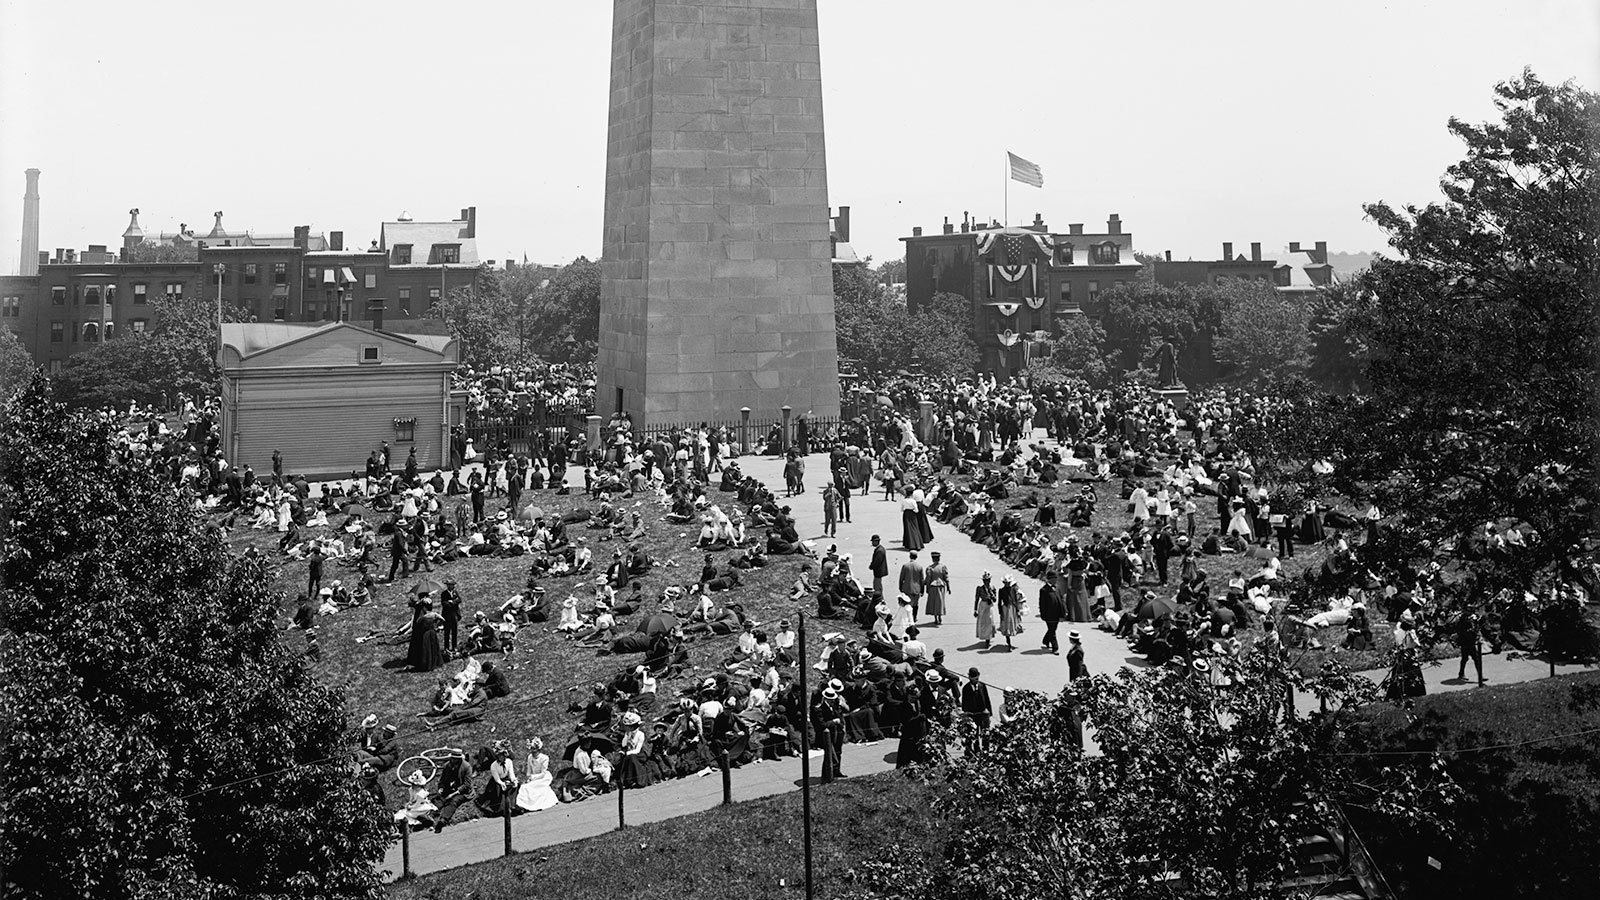 The Bunker Hill Monument on Bunker Hill Day, published by the Detroit Publishing Co.